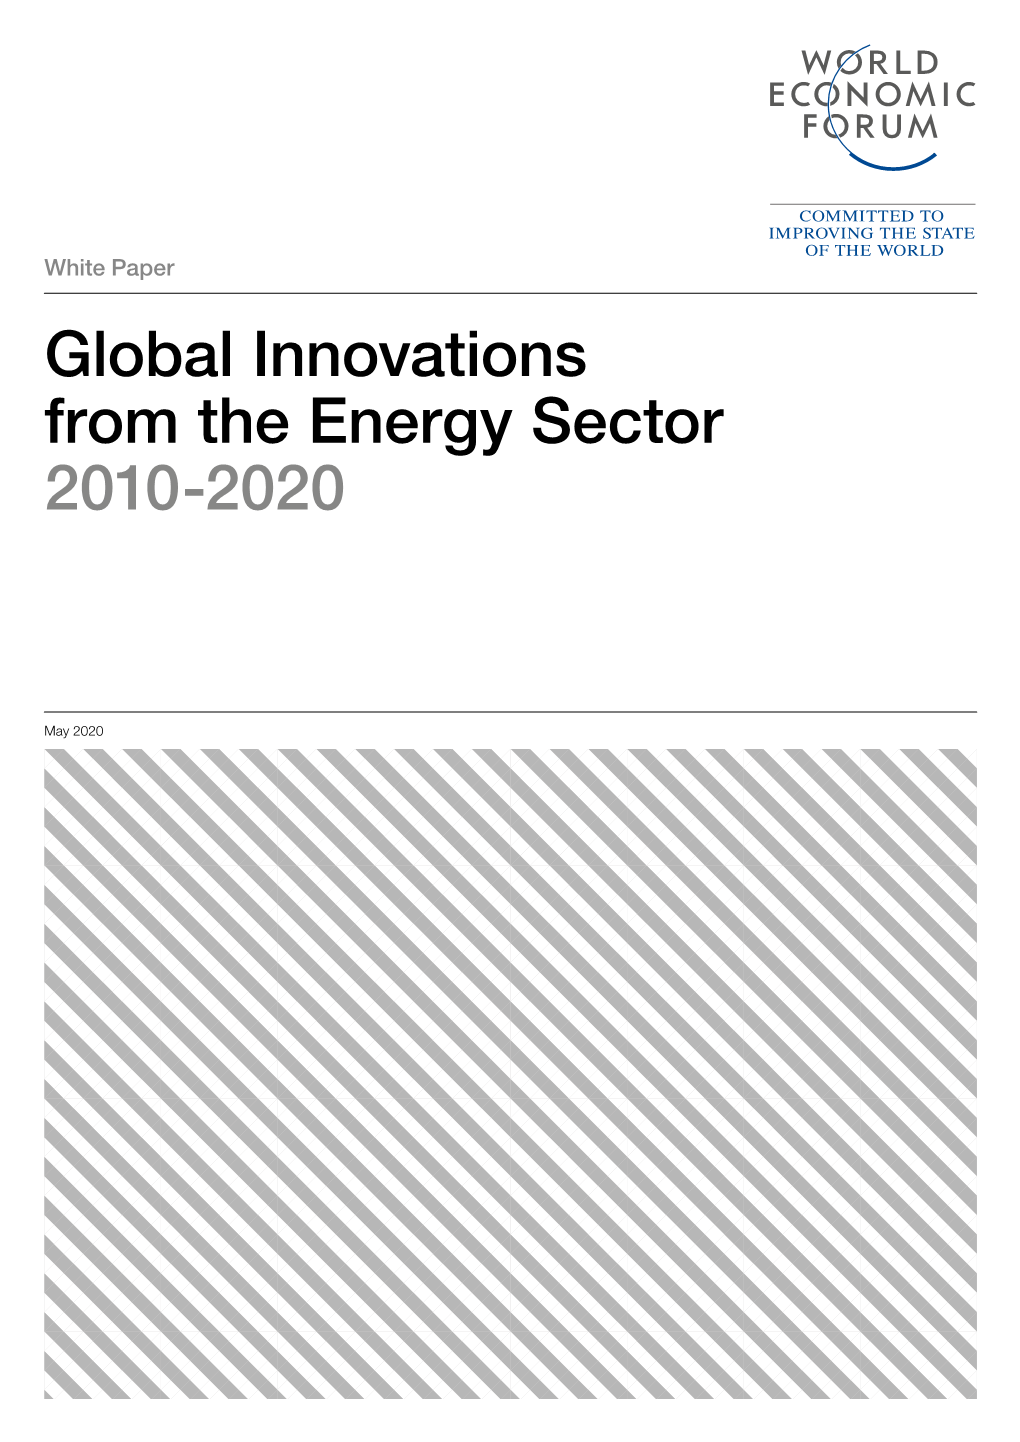 Global Innovations from the Energy Sector 2010-2020